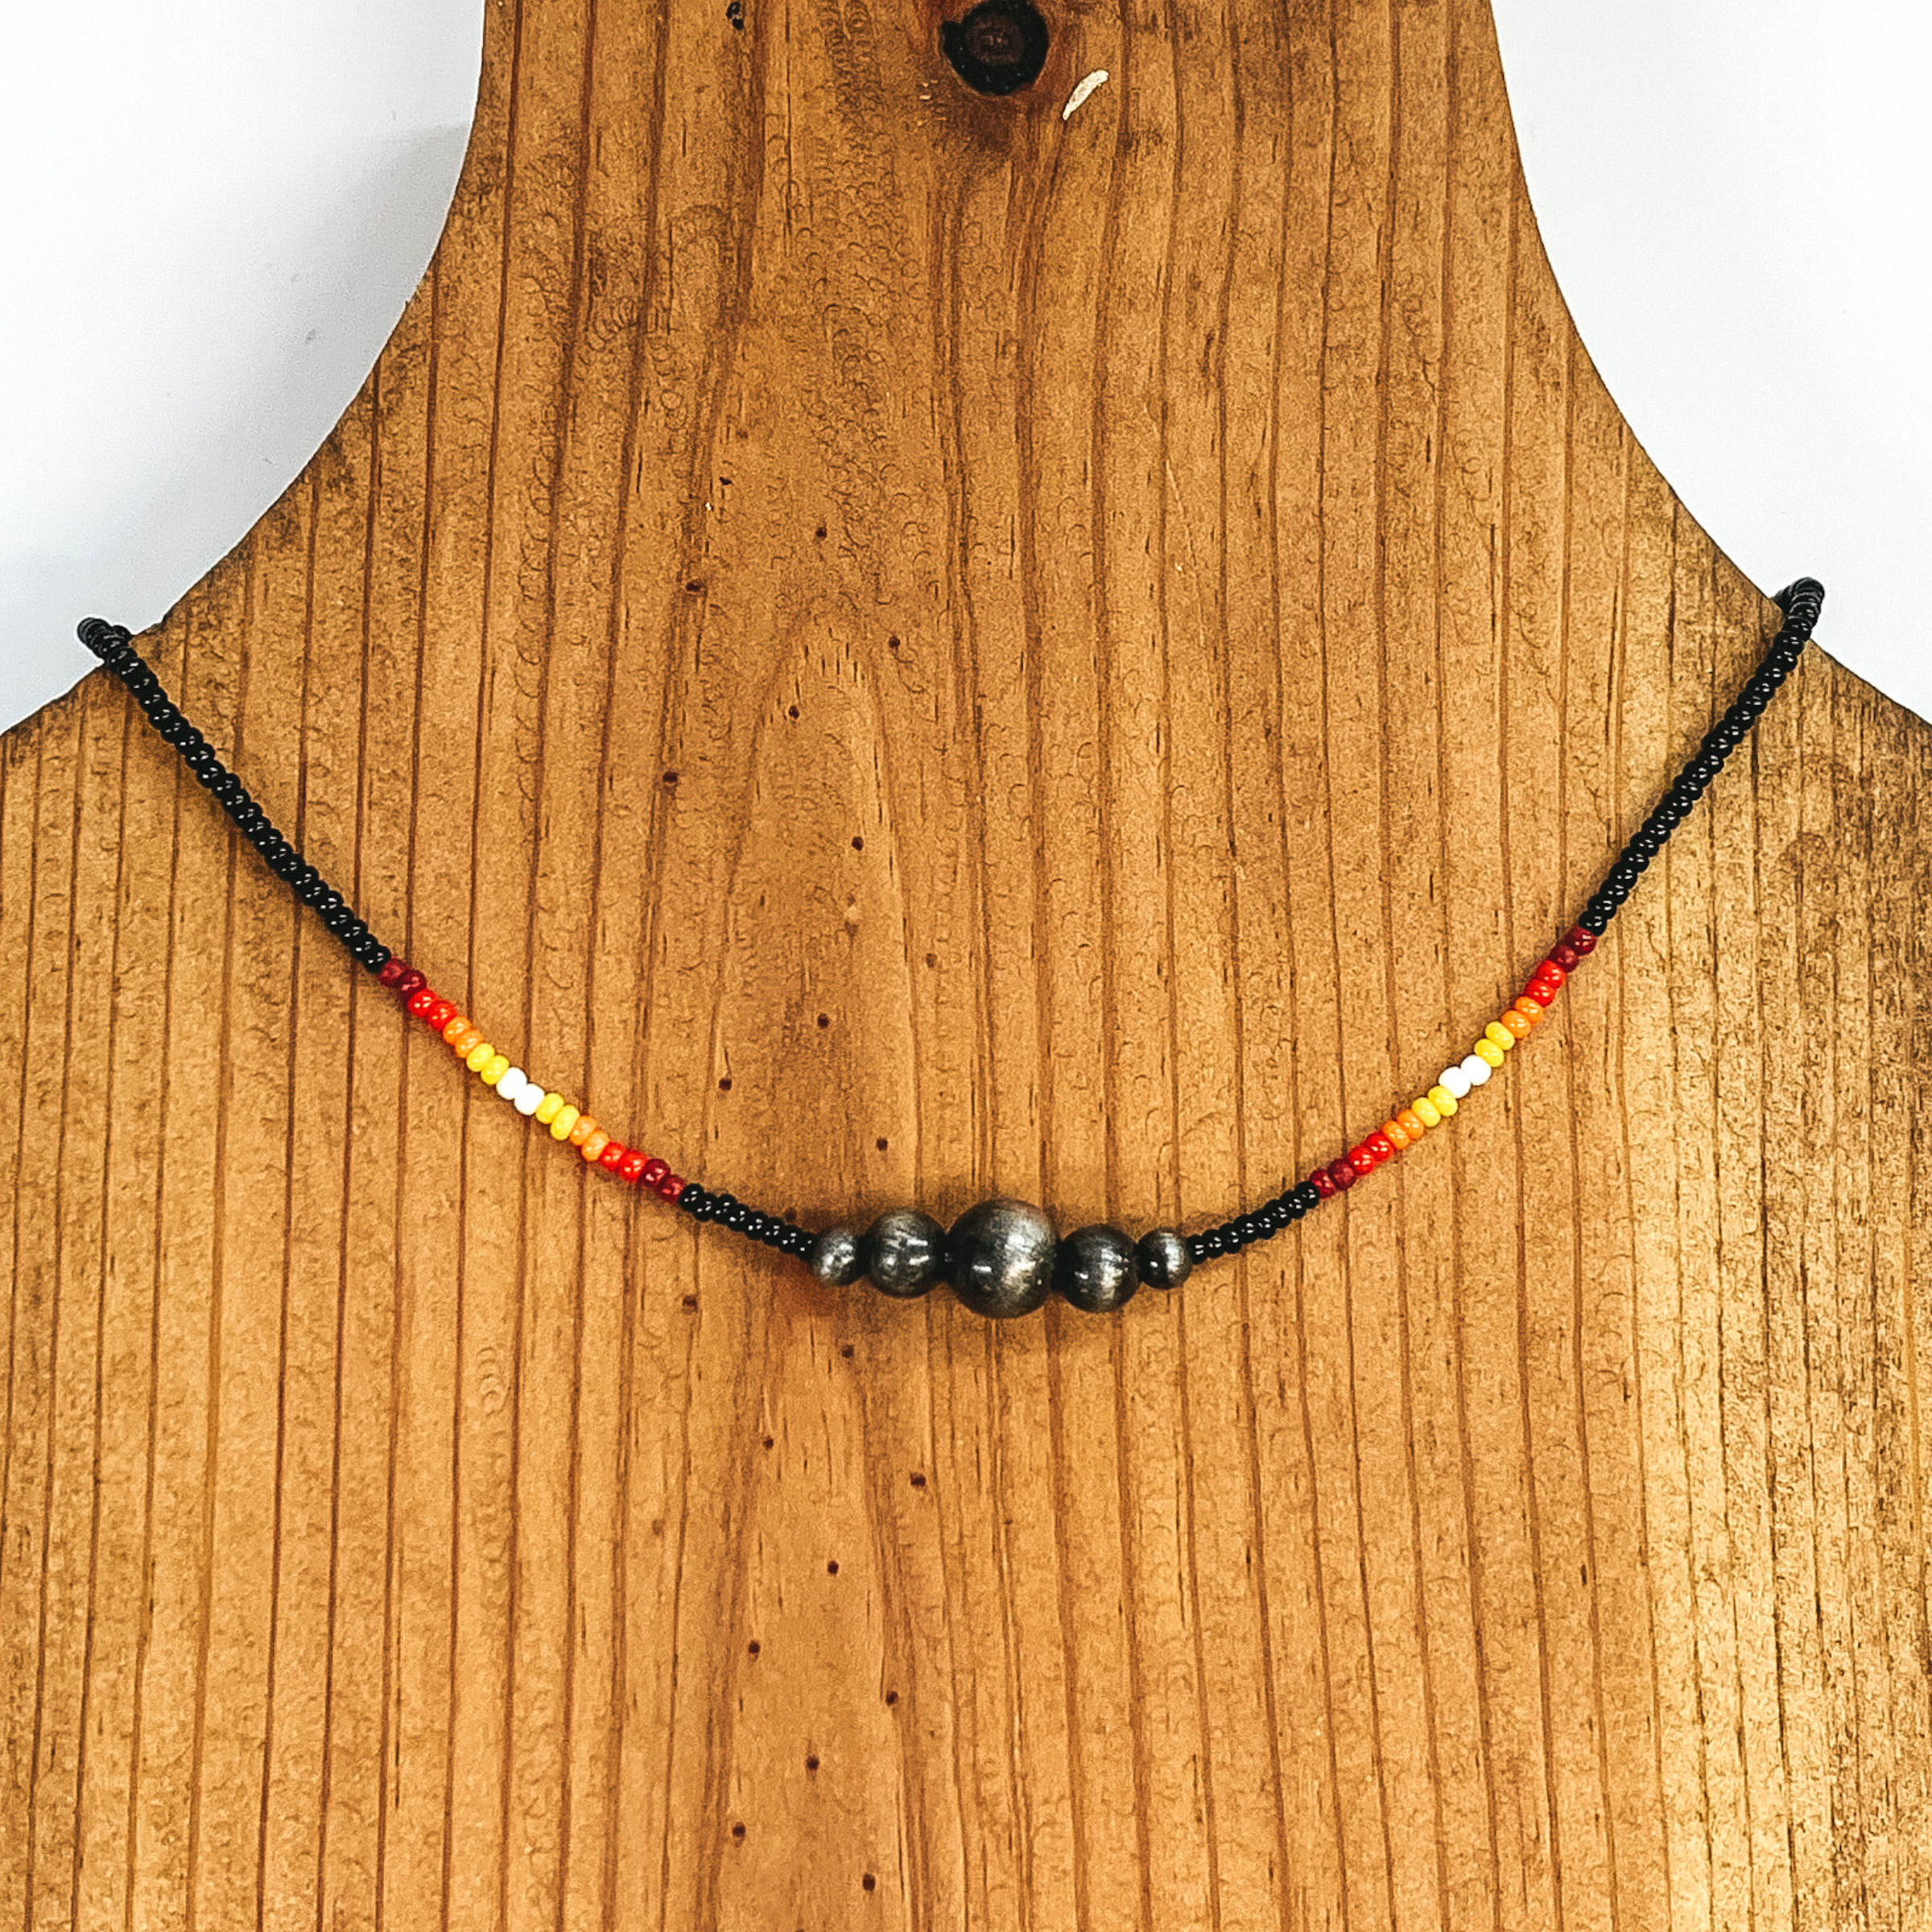 Black beaded necklace with center silver beads of varying sizes. On each side of the silver, center beads there is a segment the has white center beads with yellow, orange, red, and maroon beads folowing on each side. This necklace is pictured on a wooden necklace holder on a white background. 